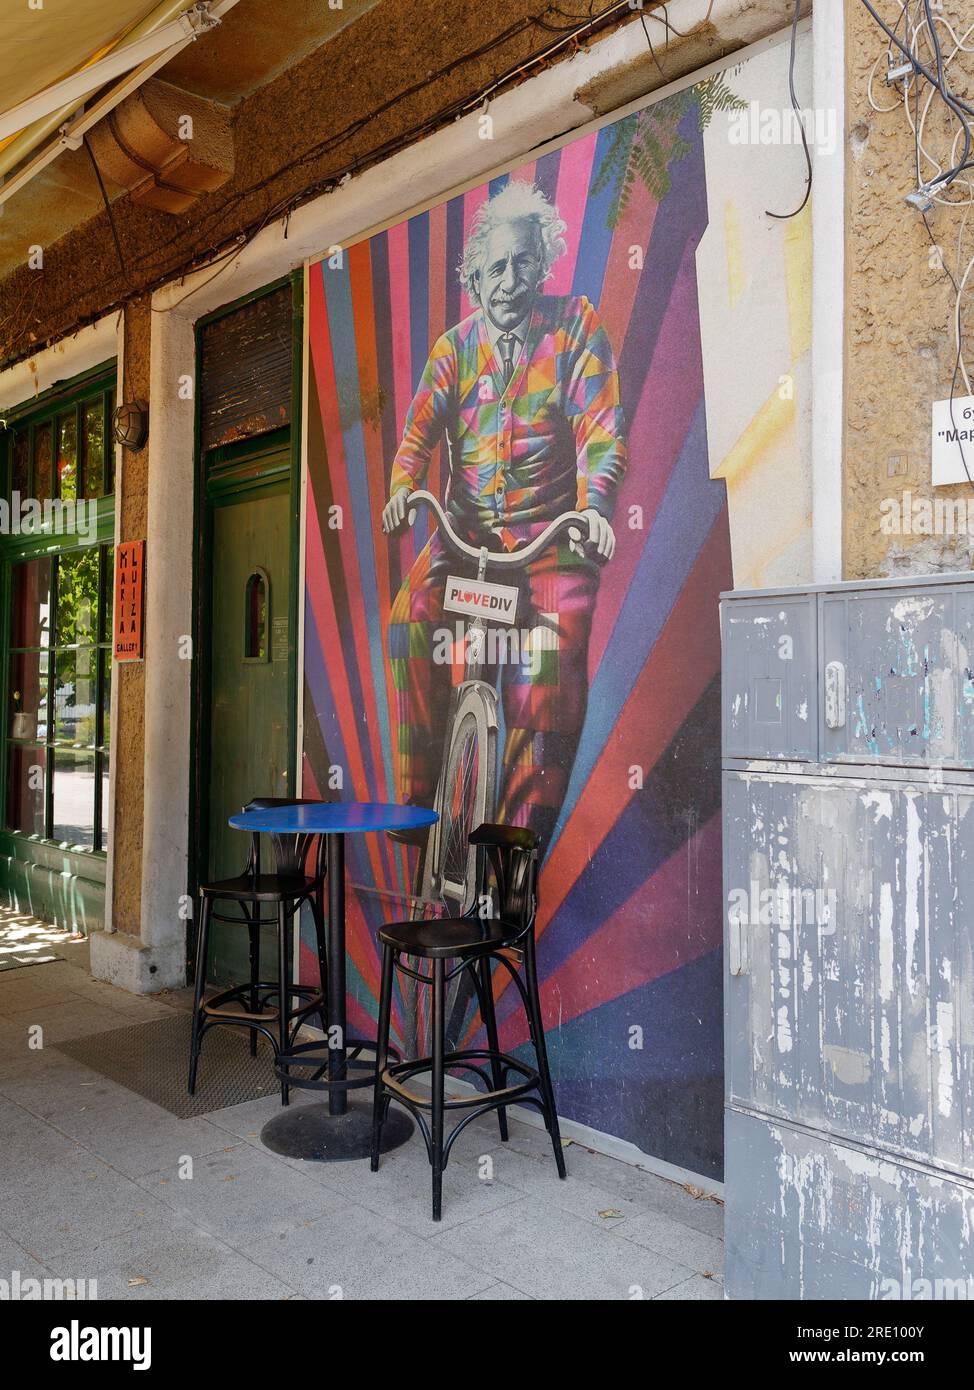 Colourful poster illustration of Albert Einstein riding a bike, set outside a cafe in the city of Plovdiv, Bulgaria Stock Photo